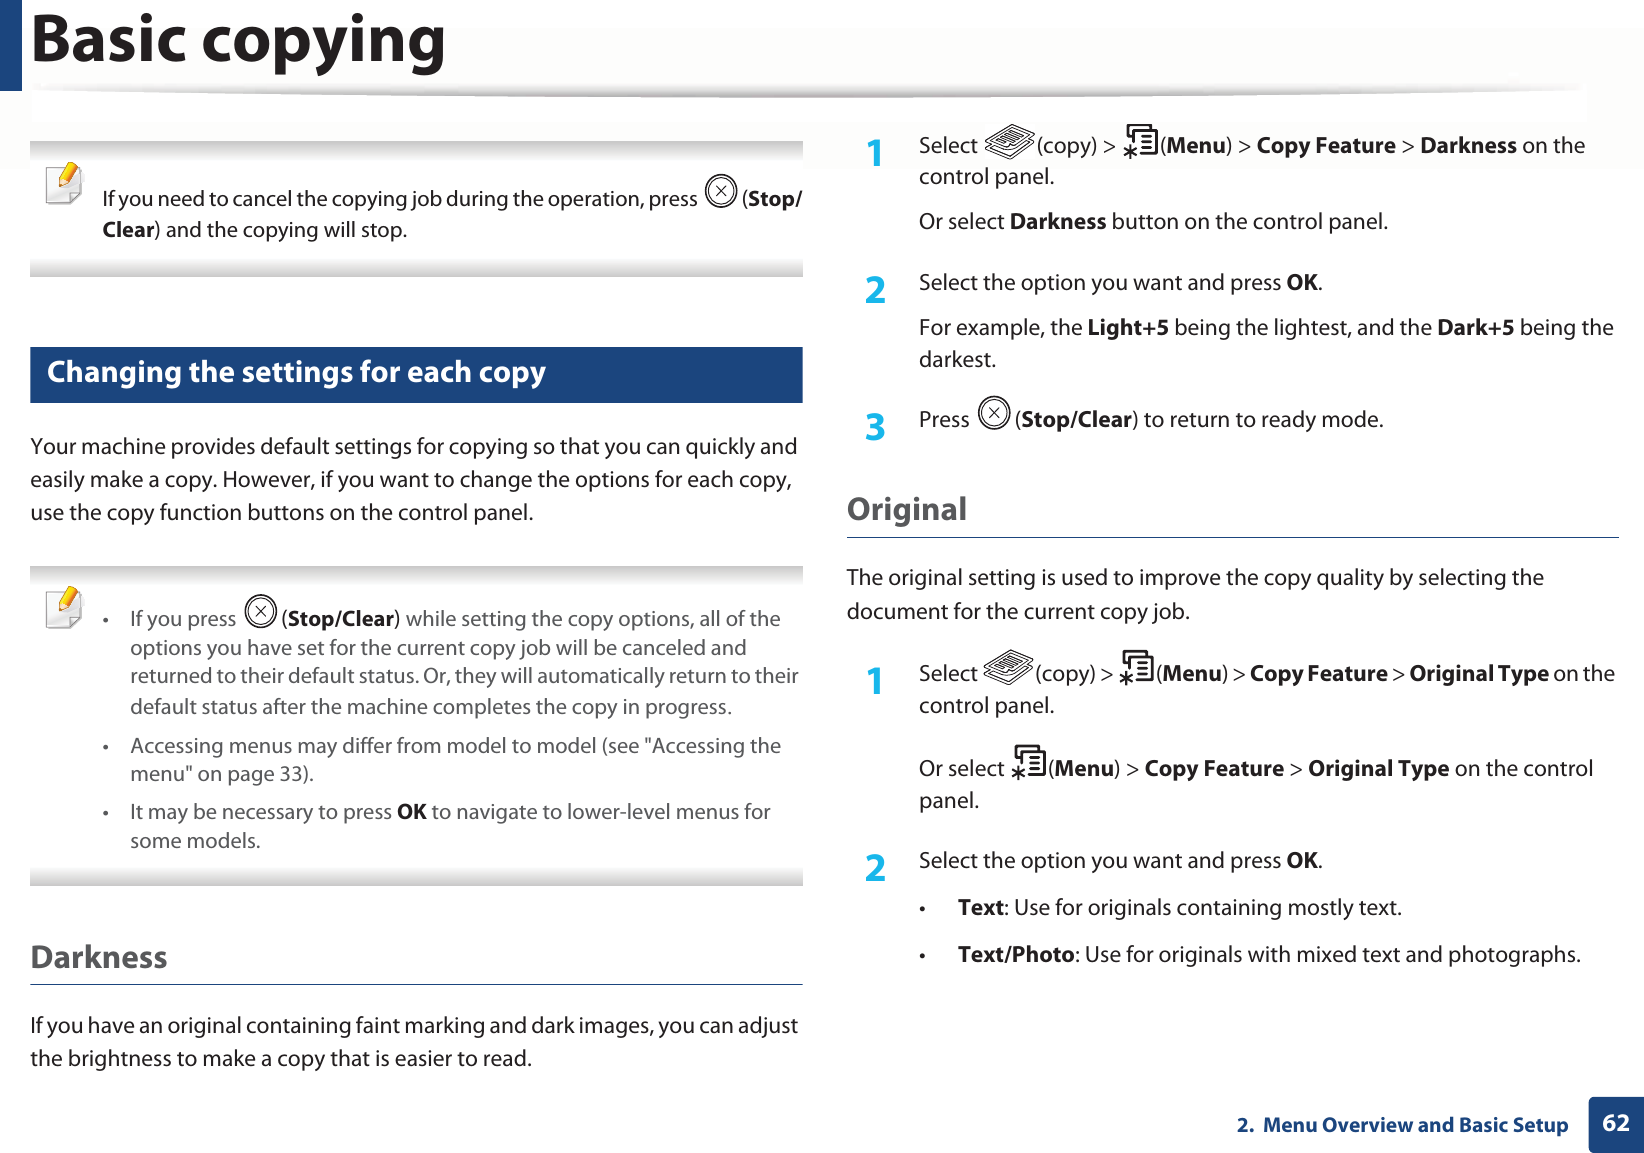 Basic copying622.  Menu Overview and Basic Setup If you need to cancel the copying job during the operation, press  (Stop/Clear) and the copying will stop. 16 Changing the settings for each copyYour machine provides default settings for copying so that you can quickly and easily make a copy. However, if you want to change the options for each copy, use the copy function buttons on the control panel. •If you press  (Stop/Clear) while setting the copy options, all of the options you have set for the current copy job will be canceled and returned to their default status. Or, they will automatically return to their default status after the machine completes the copy in progressU• Accessing menus may differ from model to model (see &quot;Accessing the menu&quot; on page 33).• It may be necessary to press OK to navigate to lower-level menus for some models. DarknessIf you have an original containing faint marking and dark images, you can adjust the brightness to make a copy that is easier to read.1Select (copy) &gt; (Menu) &gt; Copy Feature &gt; Darkness on the control panel.Or select Darkness button on the control panel.2  Select the option you want and press OK.For example, the Light+5 being the lightest, and the Dark+5 being the darkest.3  Press (Stop/Clear) to return to ready mode.Original The original setting is used to improve the copy quality by selecting the document for the current copy job.1Select (copy) &gt; (Menu) &gt; Copy Feature &gt; Original Type on the control panel.Or select  (Menu) &gt; Copy Feature &gt; Original Type on the control panel.2  Select the option you want and press OK.•Text: Use for originals containing mostly text.•Text/Photo: Use for originals with mixed text and photographs.